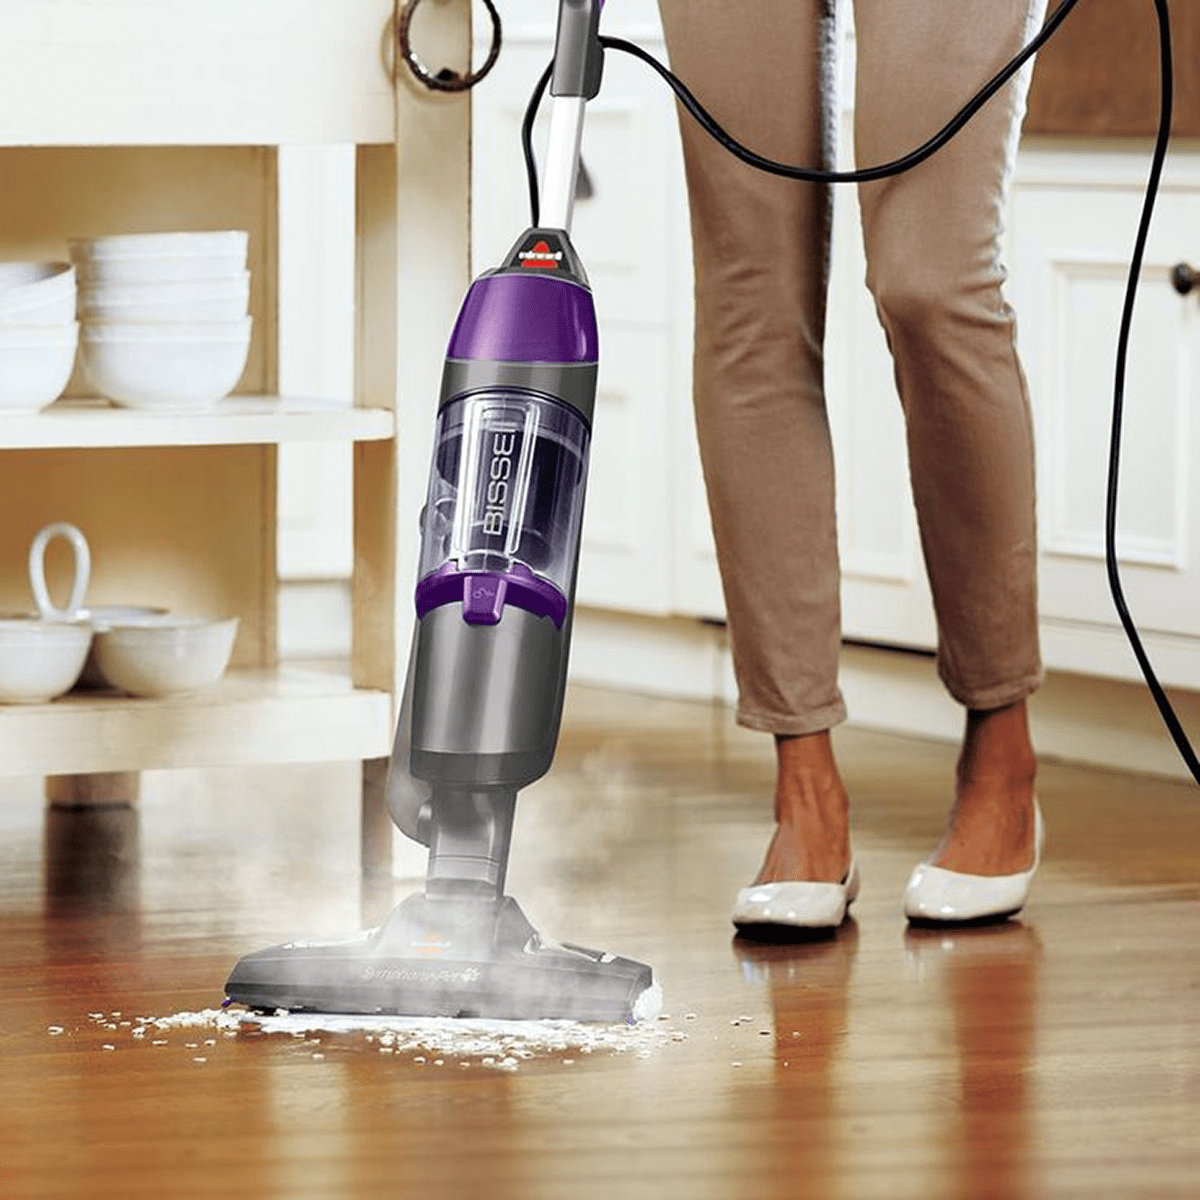 https://s3-assets.sylvane.com/media/images/products/bissell-symphony-pet-all-in-one-vacuum-steam-mop-lifestyle-2.png